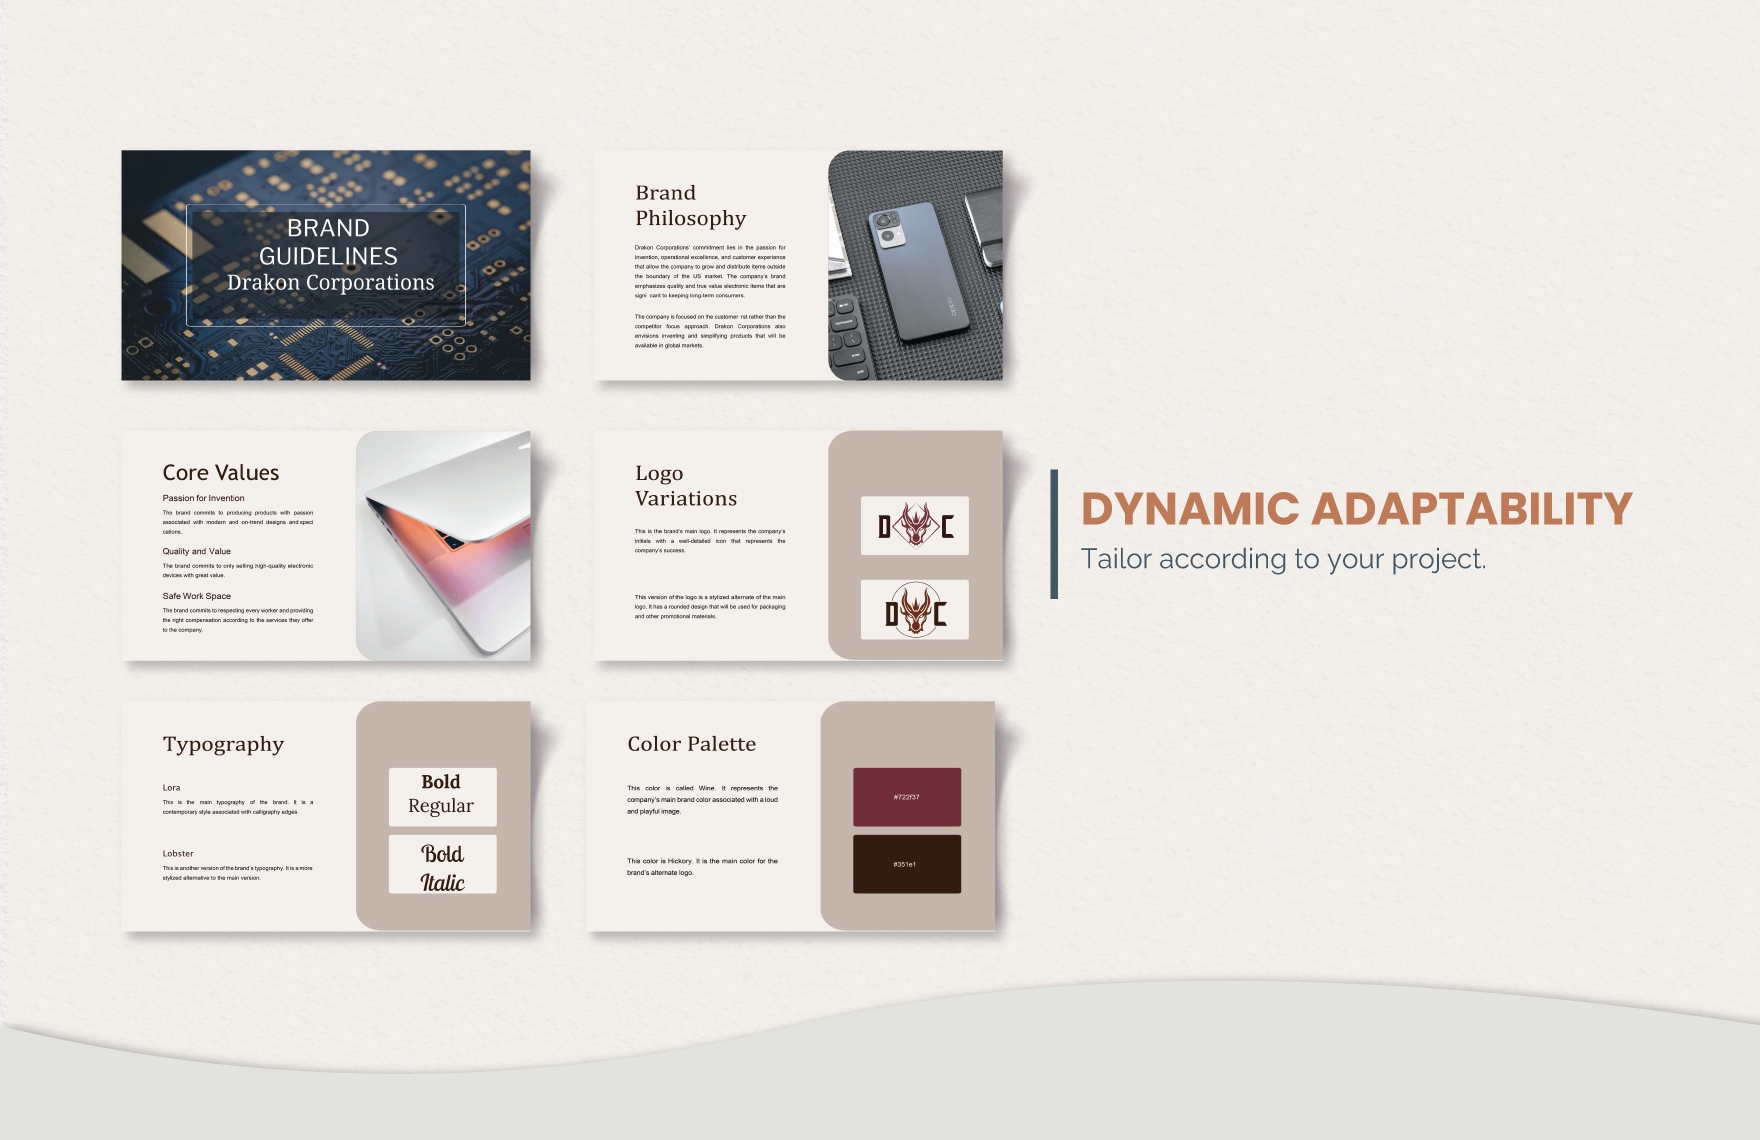 Corporate Brand Guidelines Template